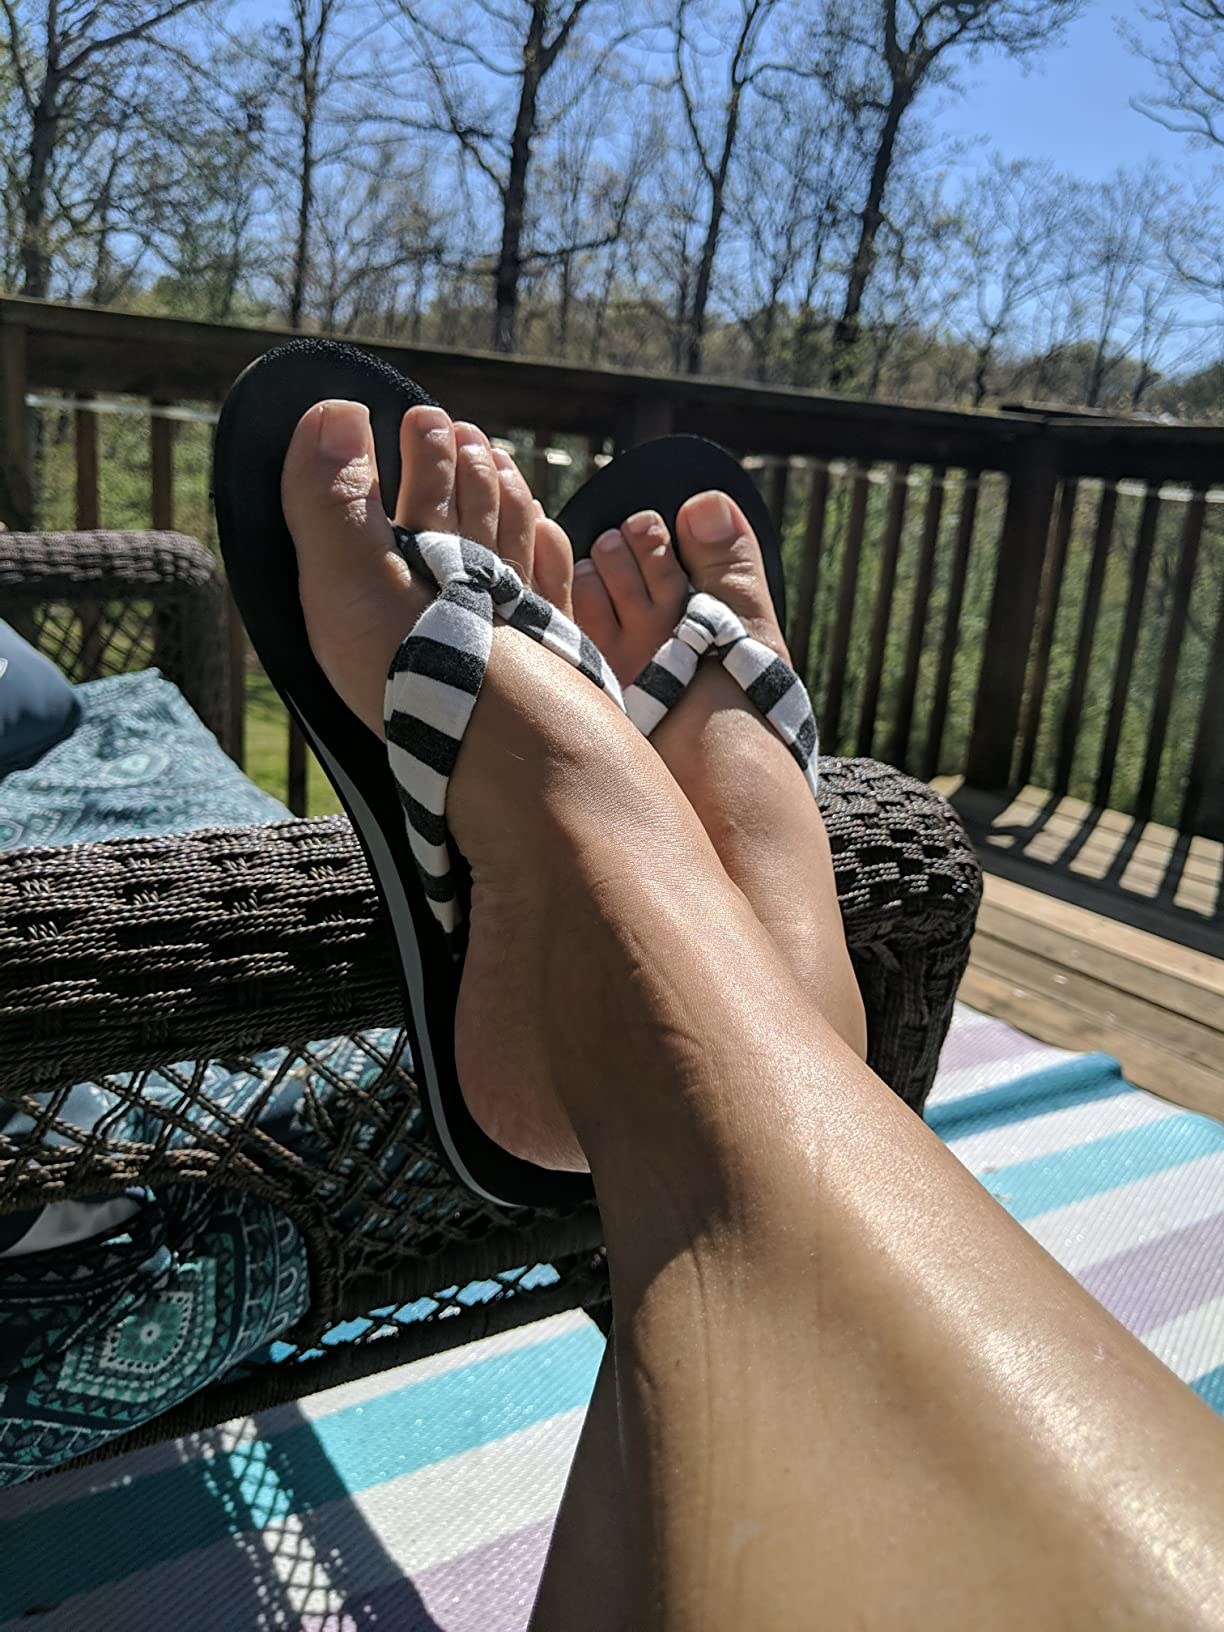 Reviewer with feet kicked up on patio lounge chair wearing black and white striped flip flops